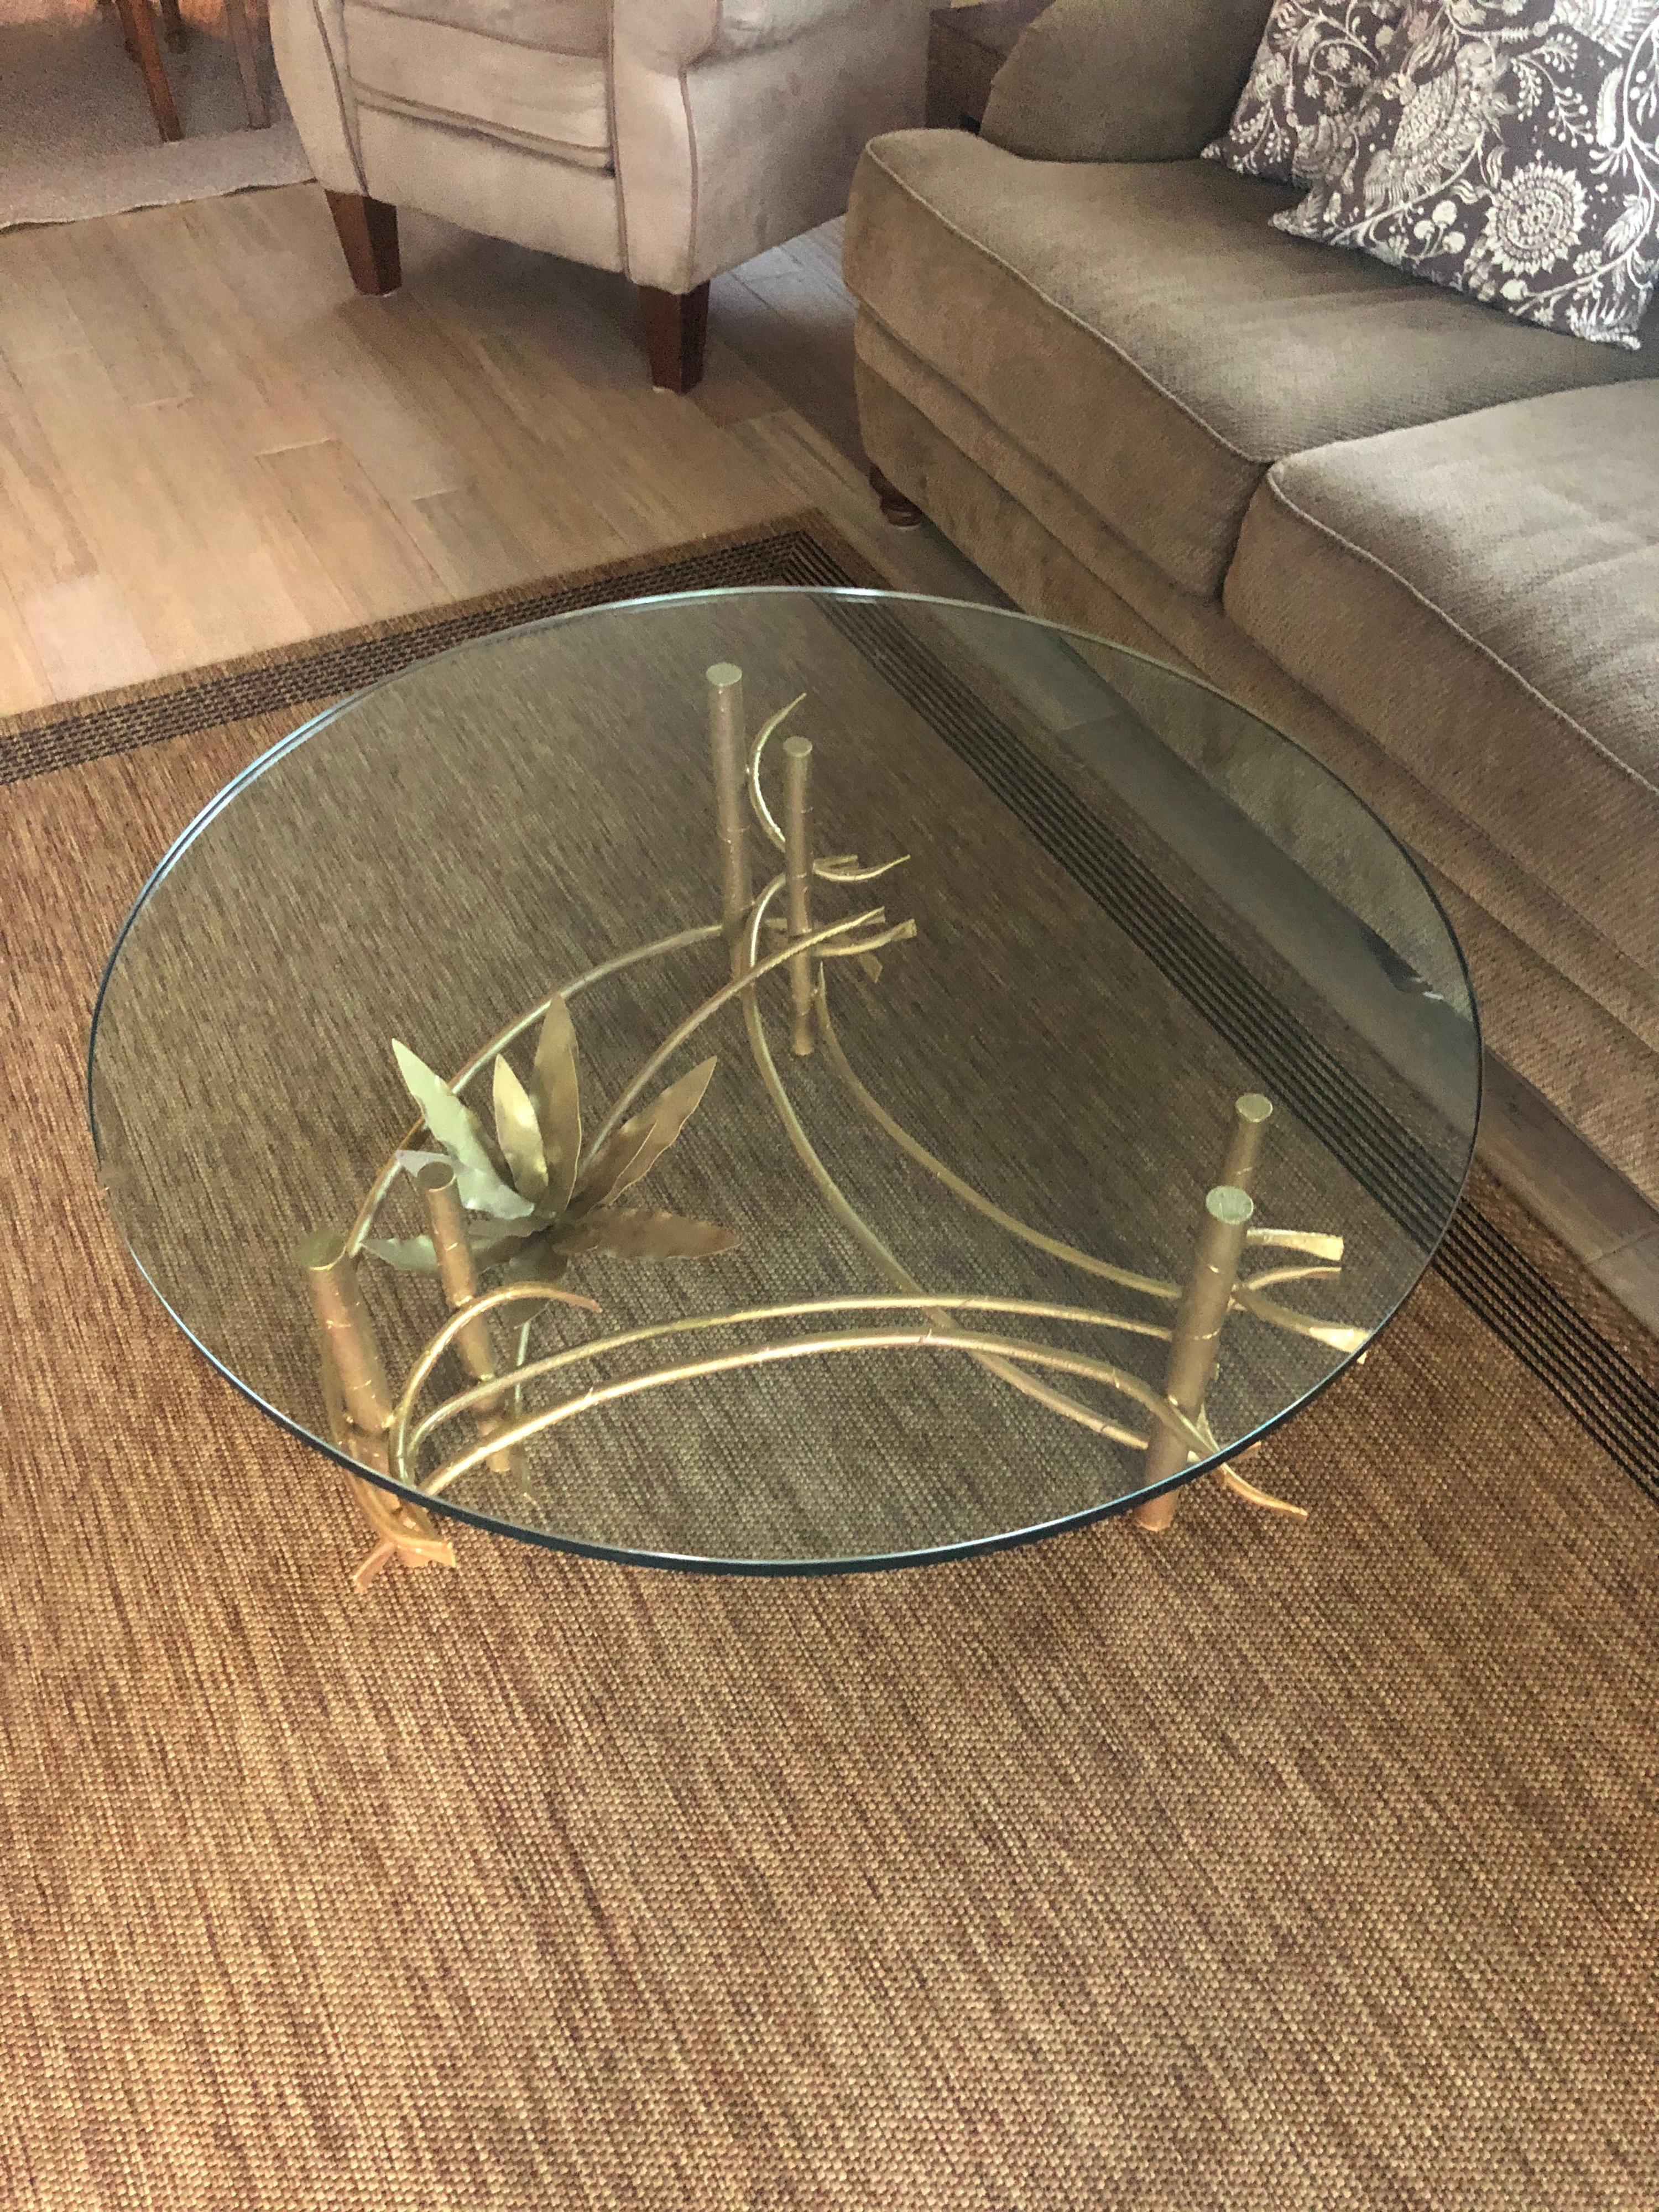 Silas Seandel Lotus Coffee Table In Good Condition For Sale In Redding, CT